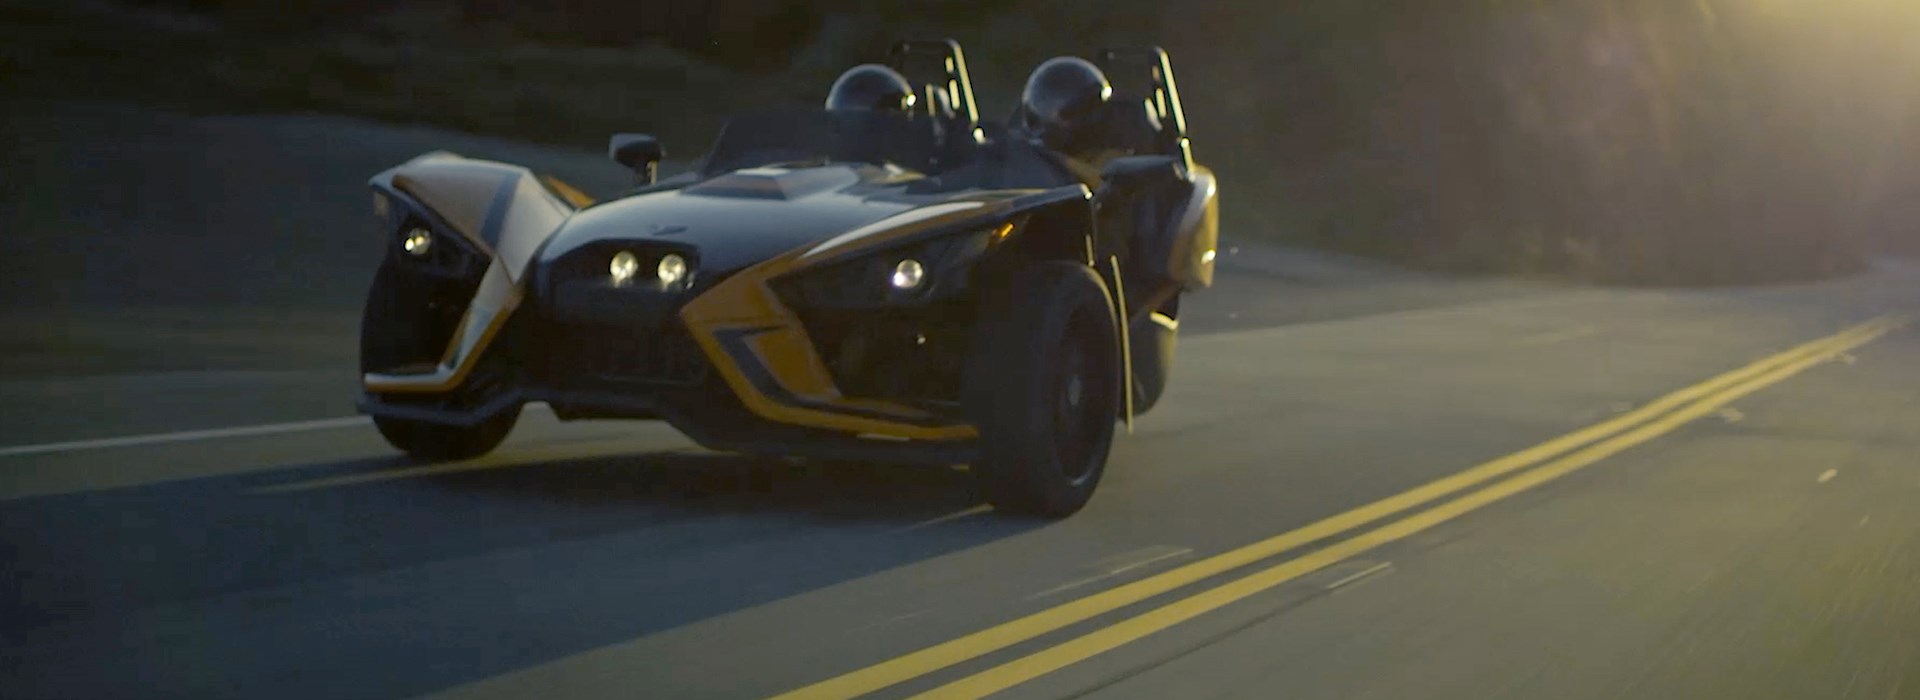 Two seat roadster driving down curvy road at dusk